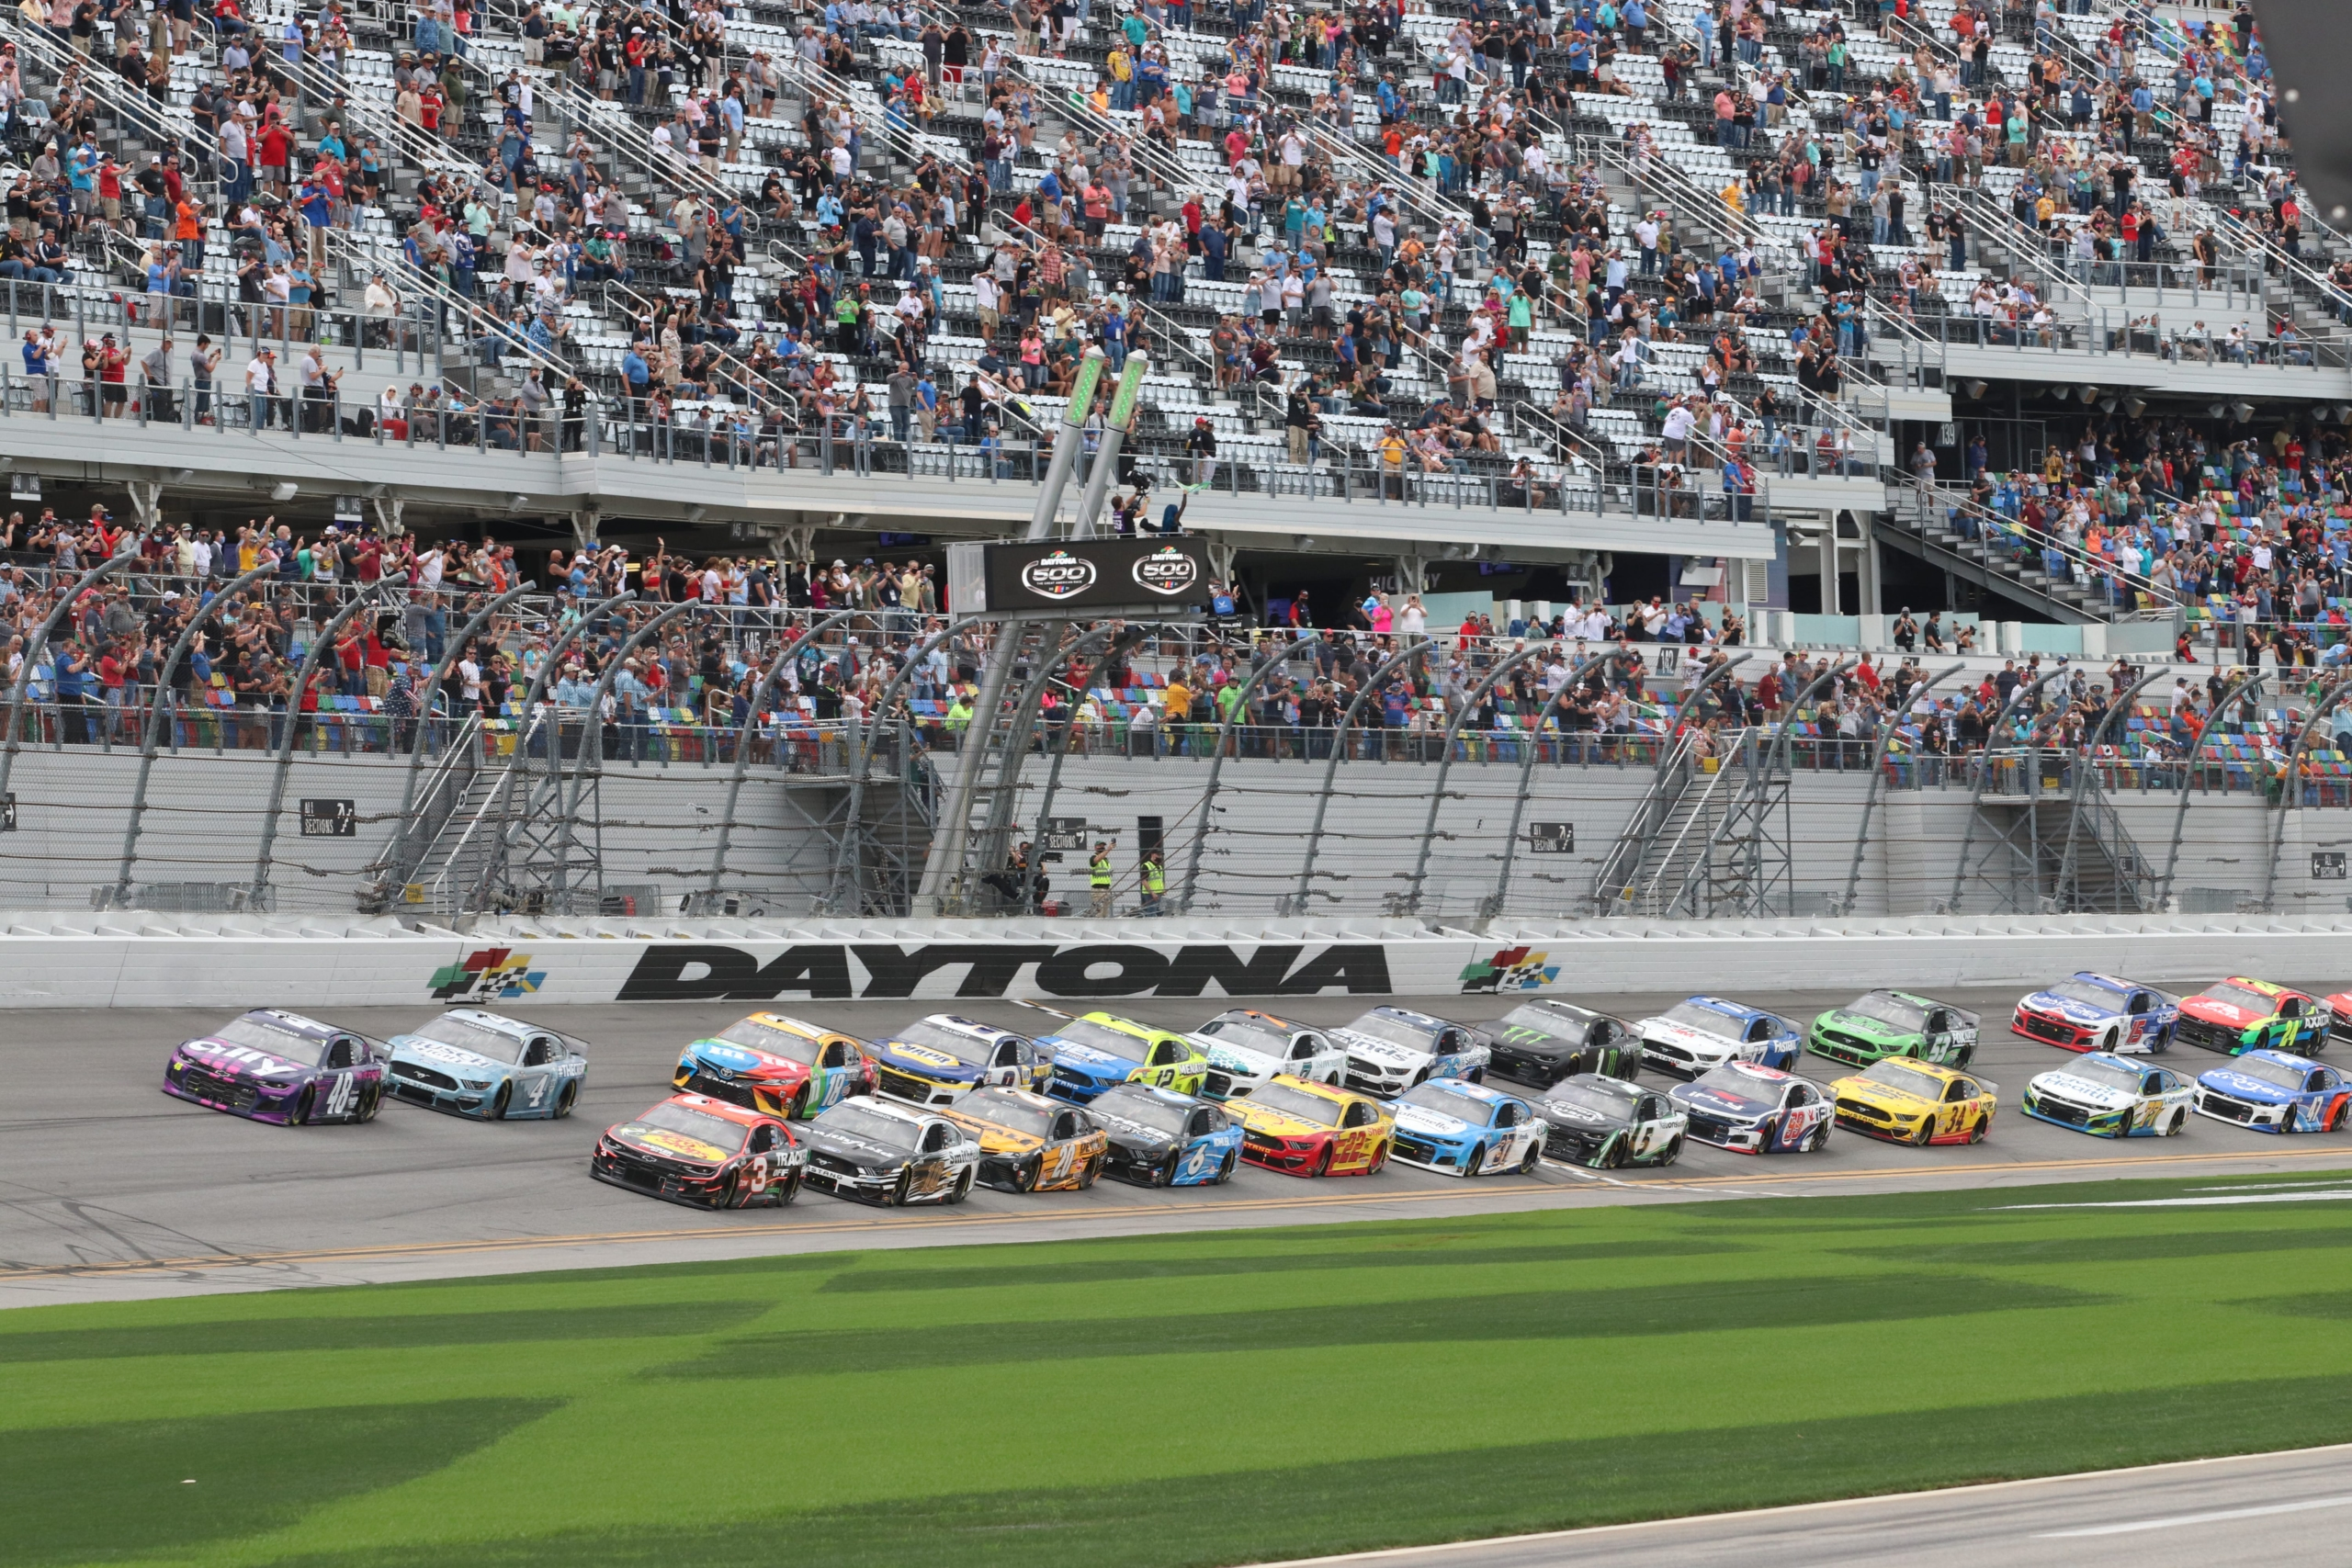 How to watch the Daytona 500 Live streaming and TV listings